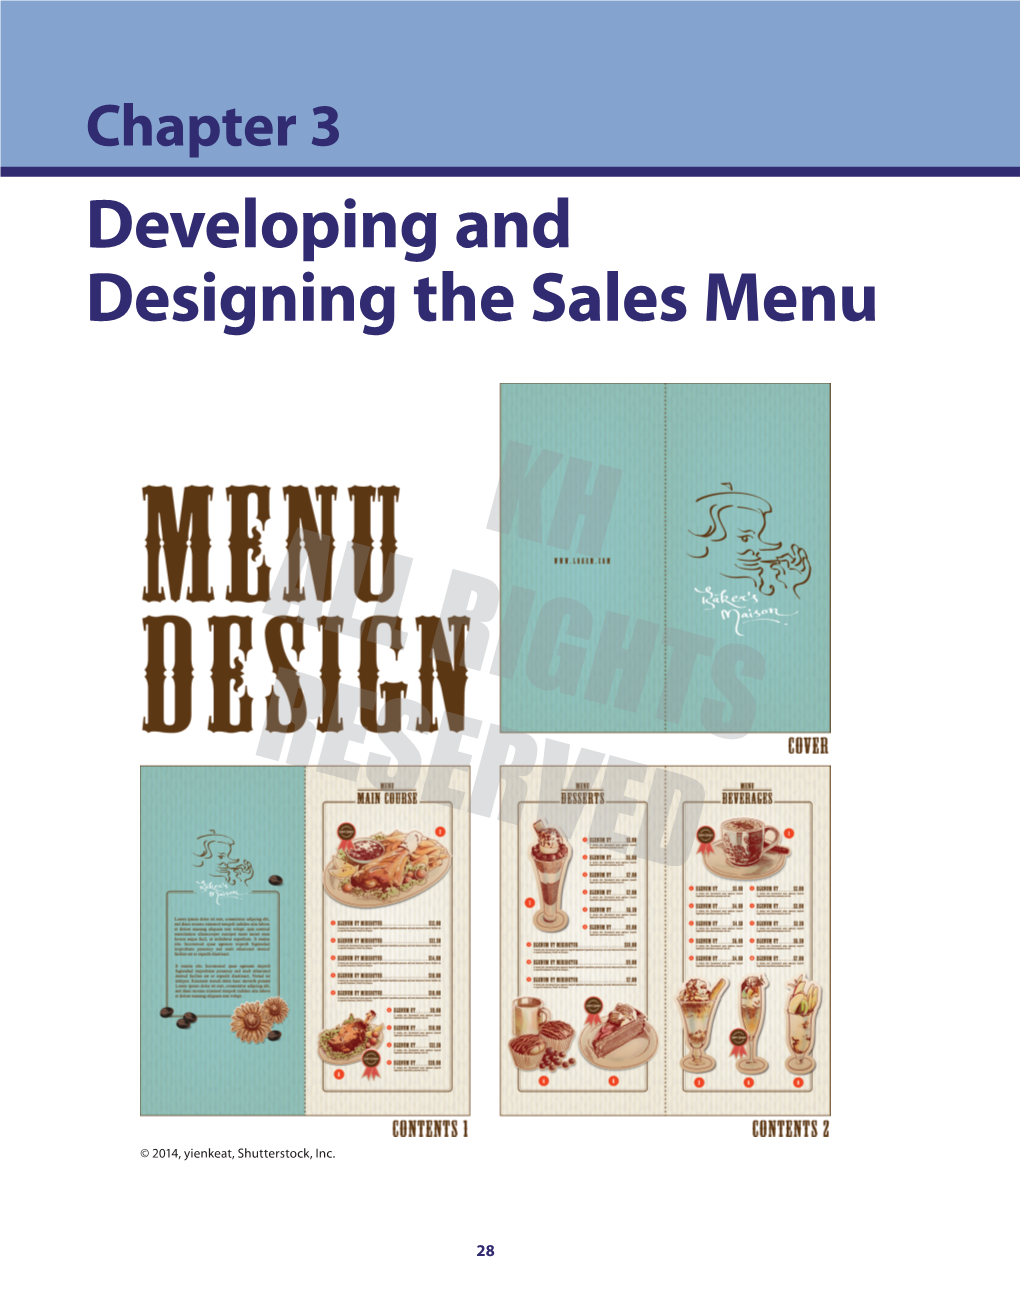 Developing and Designing the Sales Menu